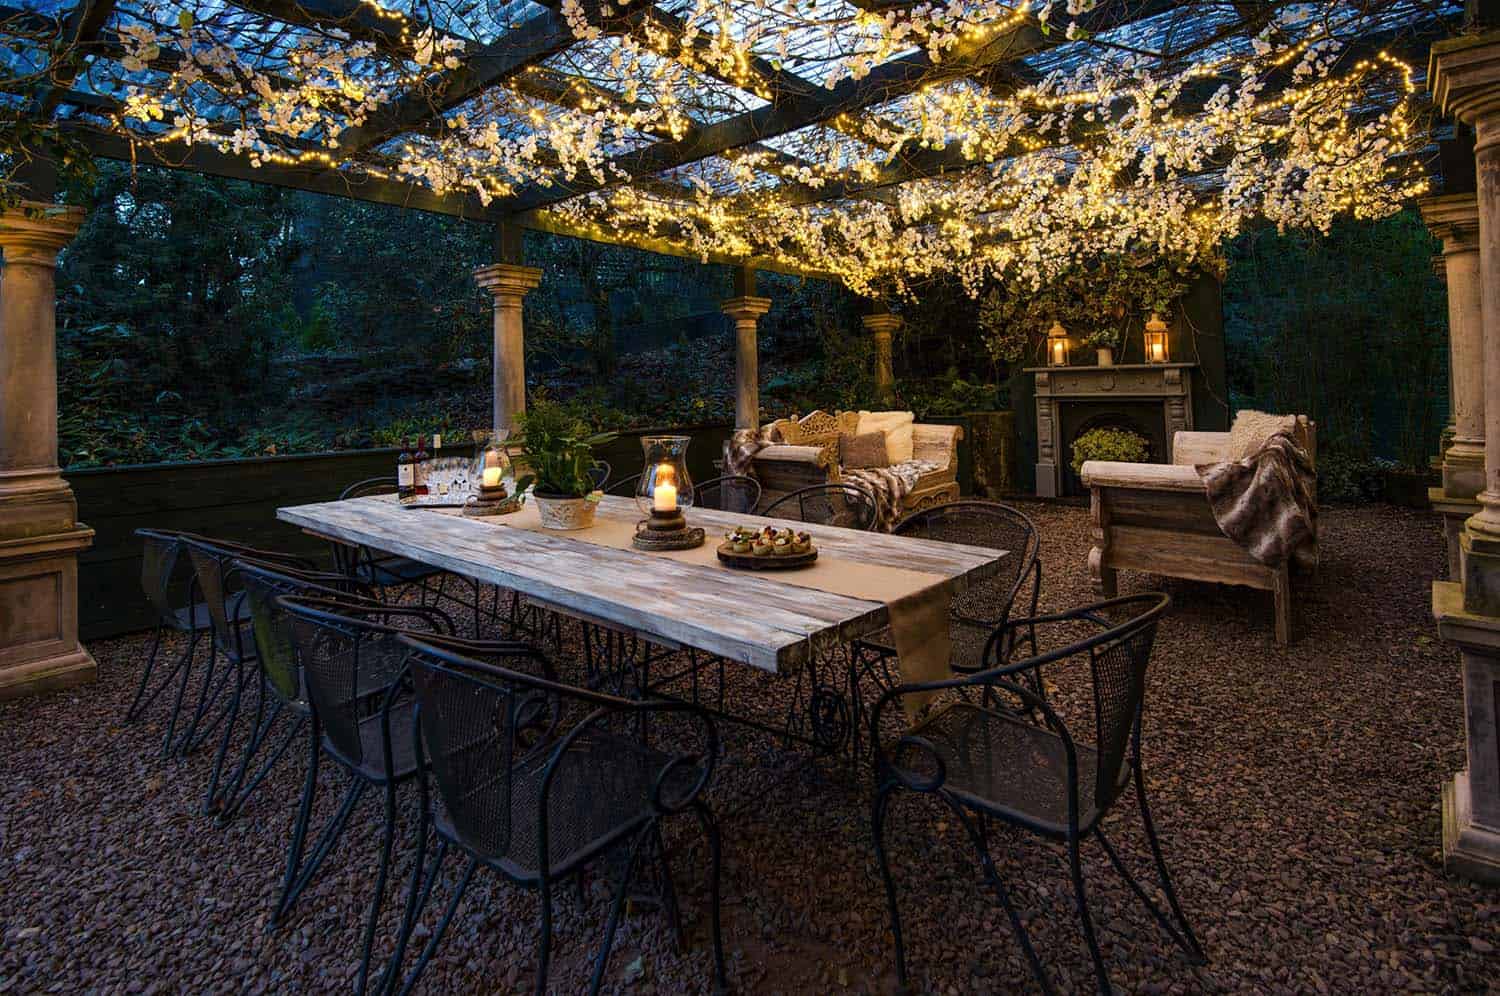 35 Brilliant and inspiring patio ideas for outdoor living and entertaining